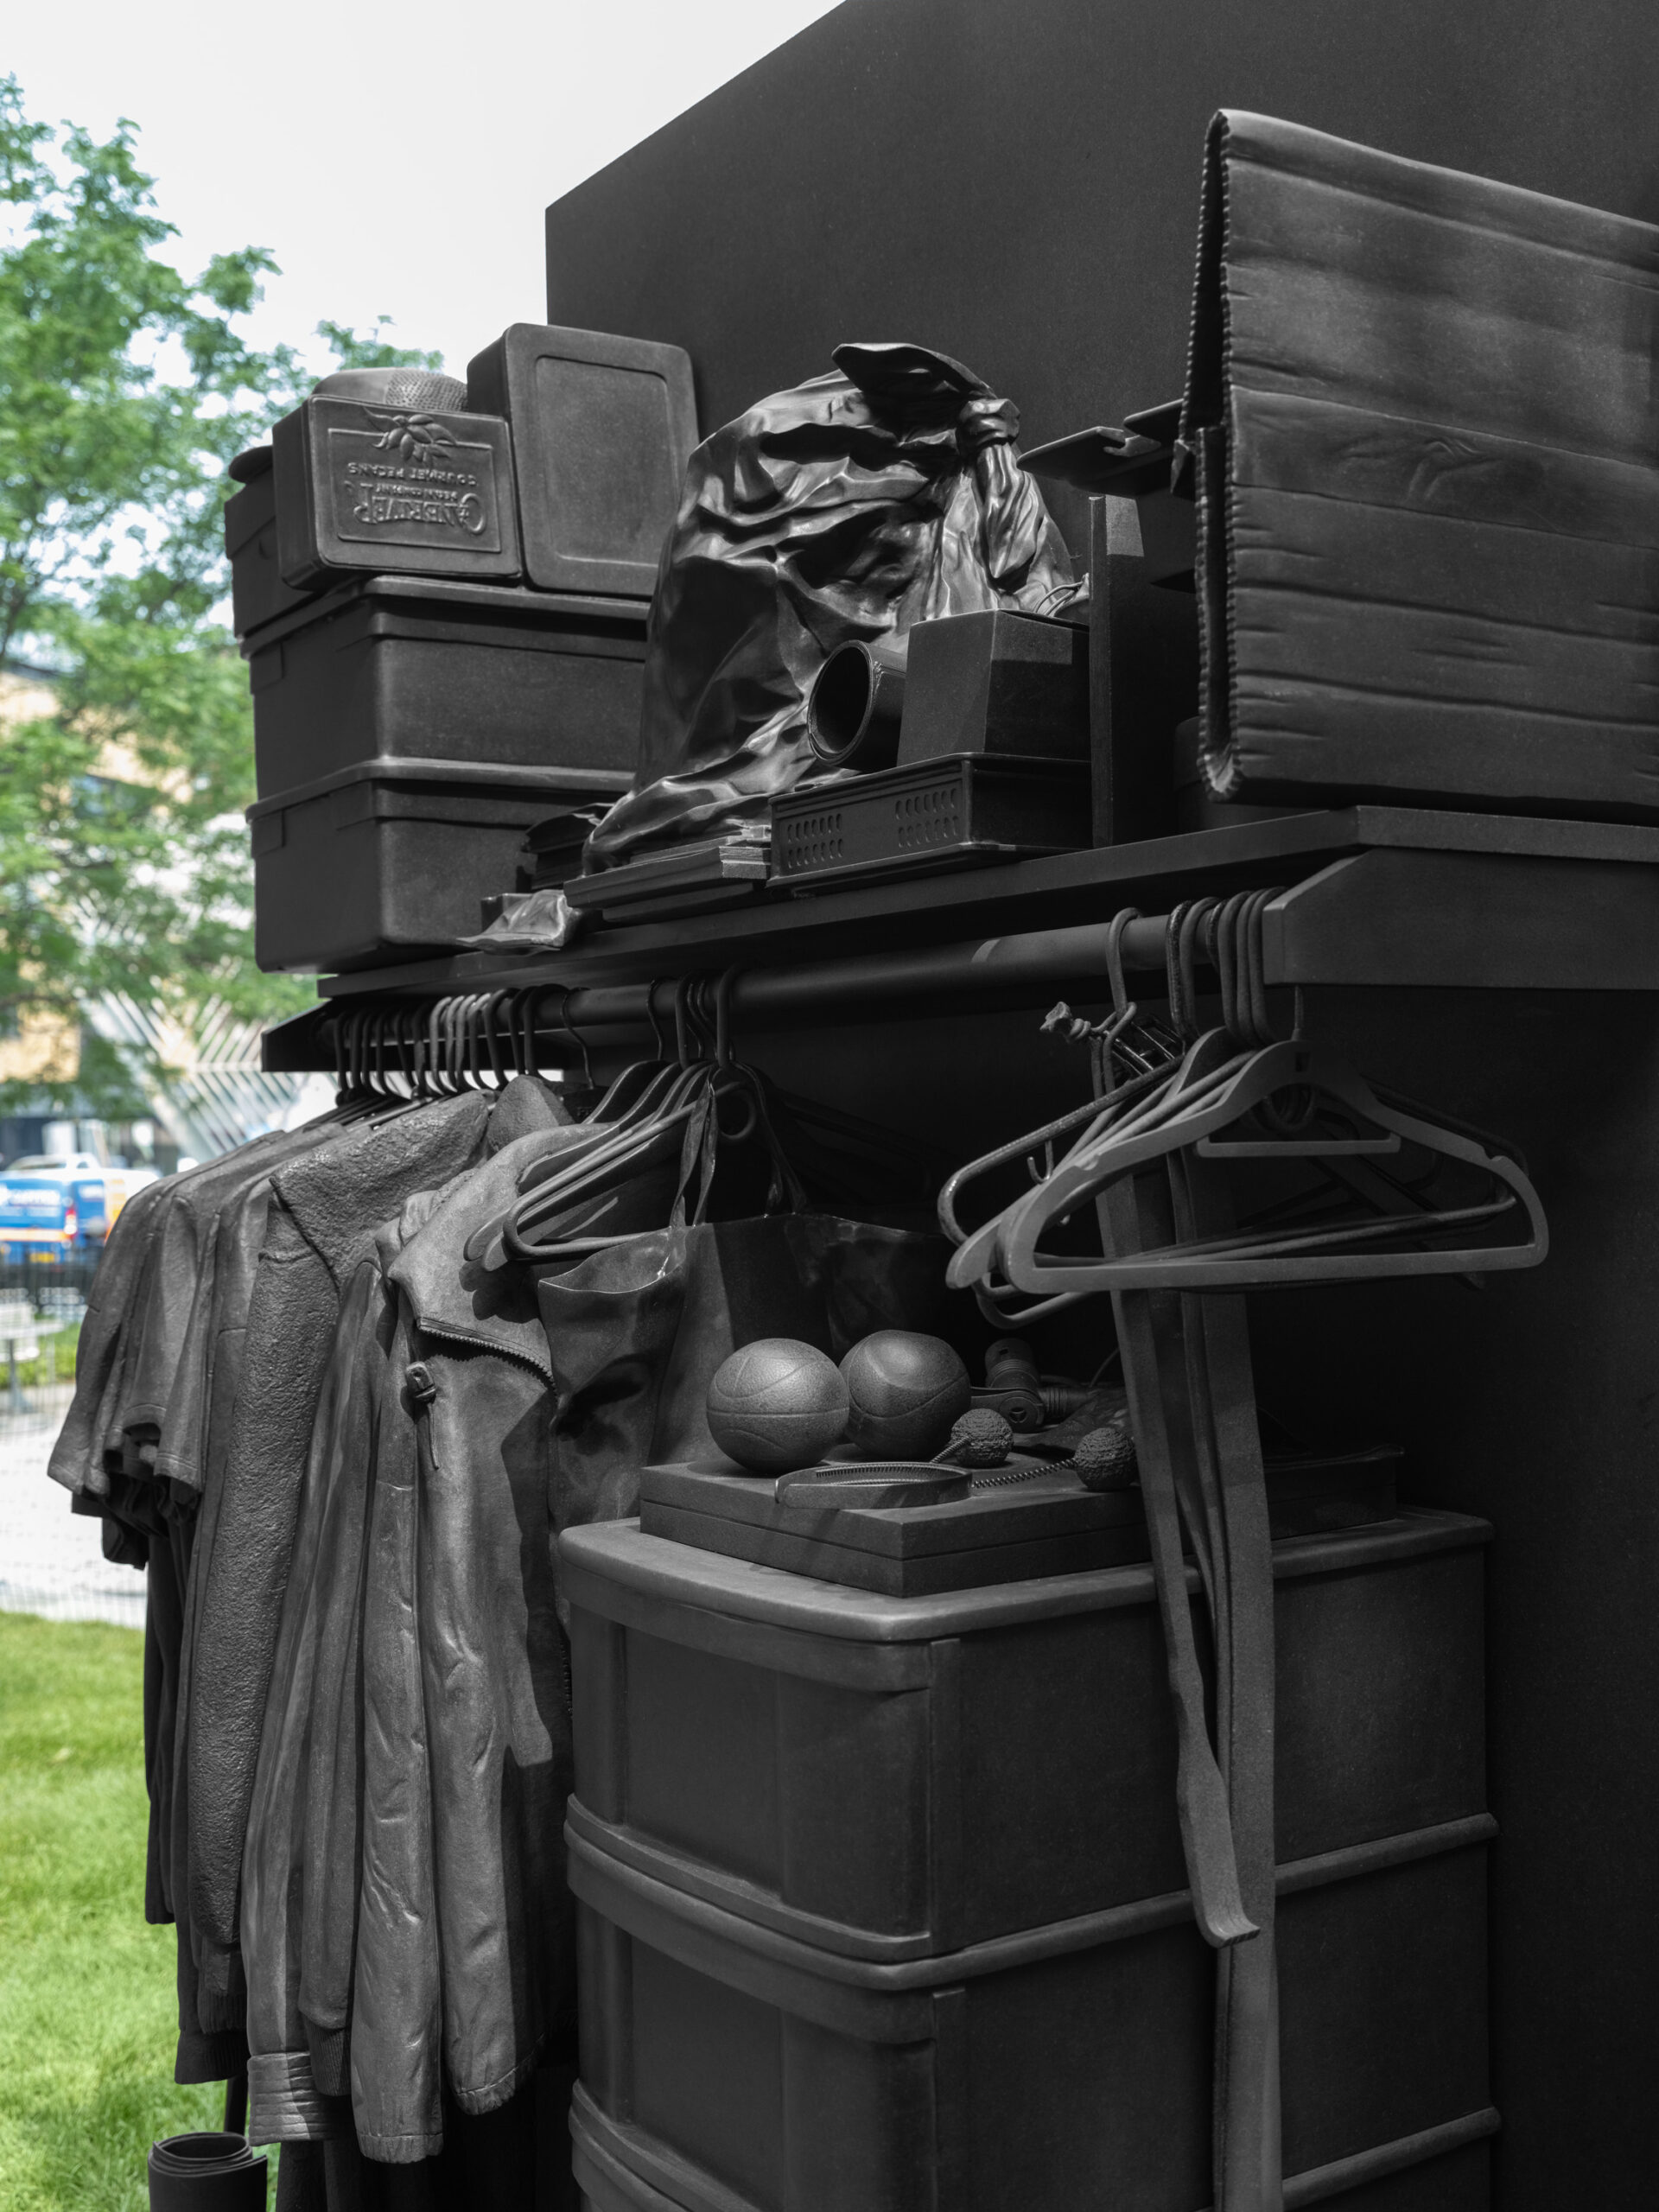 A detail of a granite sculpture in the New York City AIDS Memorial Park of a bedroom closet by Jim Hodges.